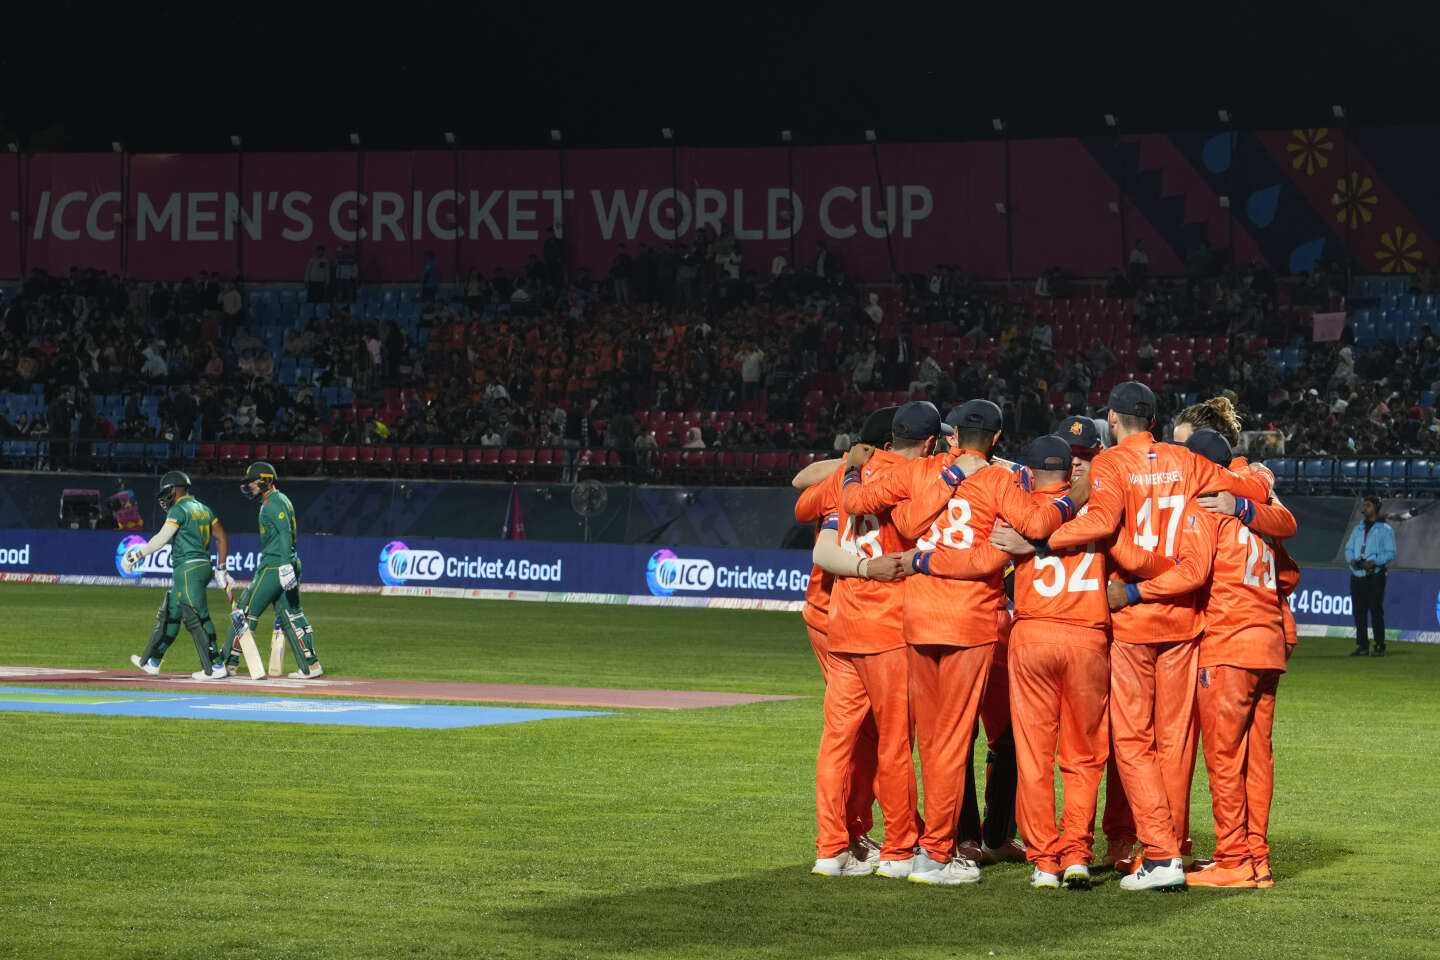 And at the Cricket World Cup in India, the Netherlands showed little openness to a “Commonwealth-like” sport.